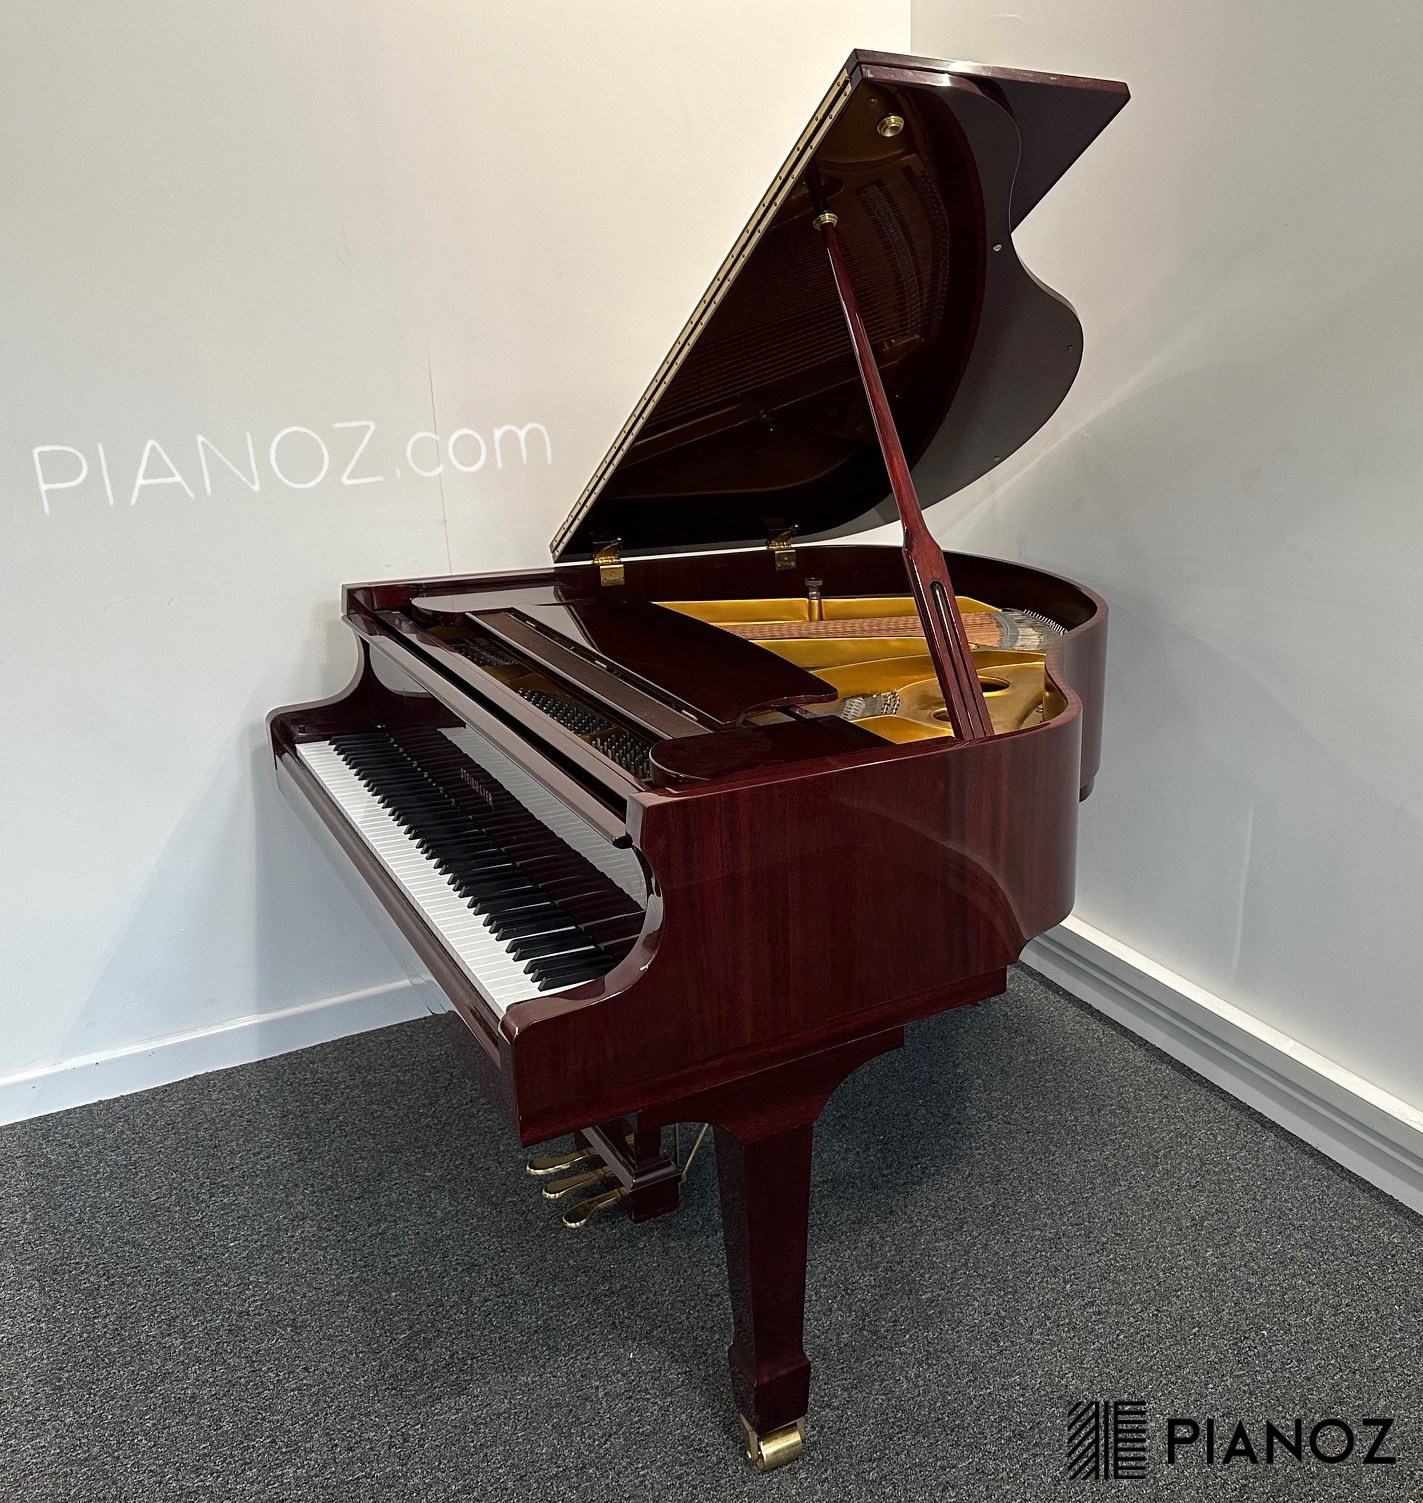 Steinmayer 148 High Gloss Baby Grand Piano piano for sale in UK